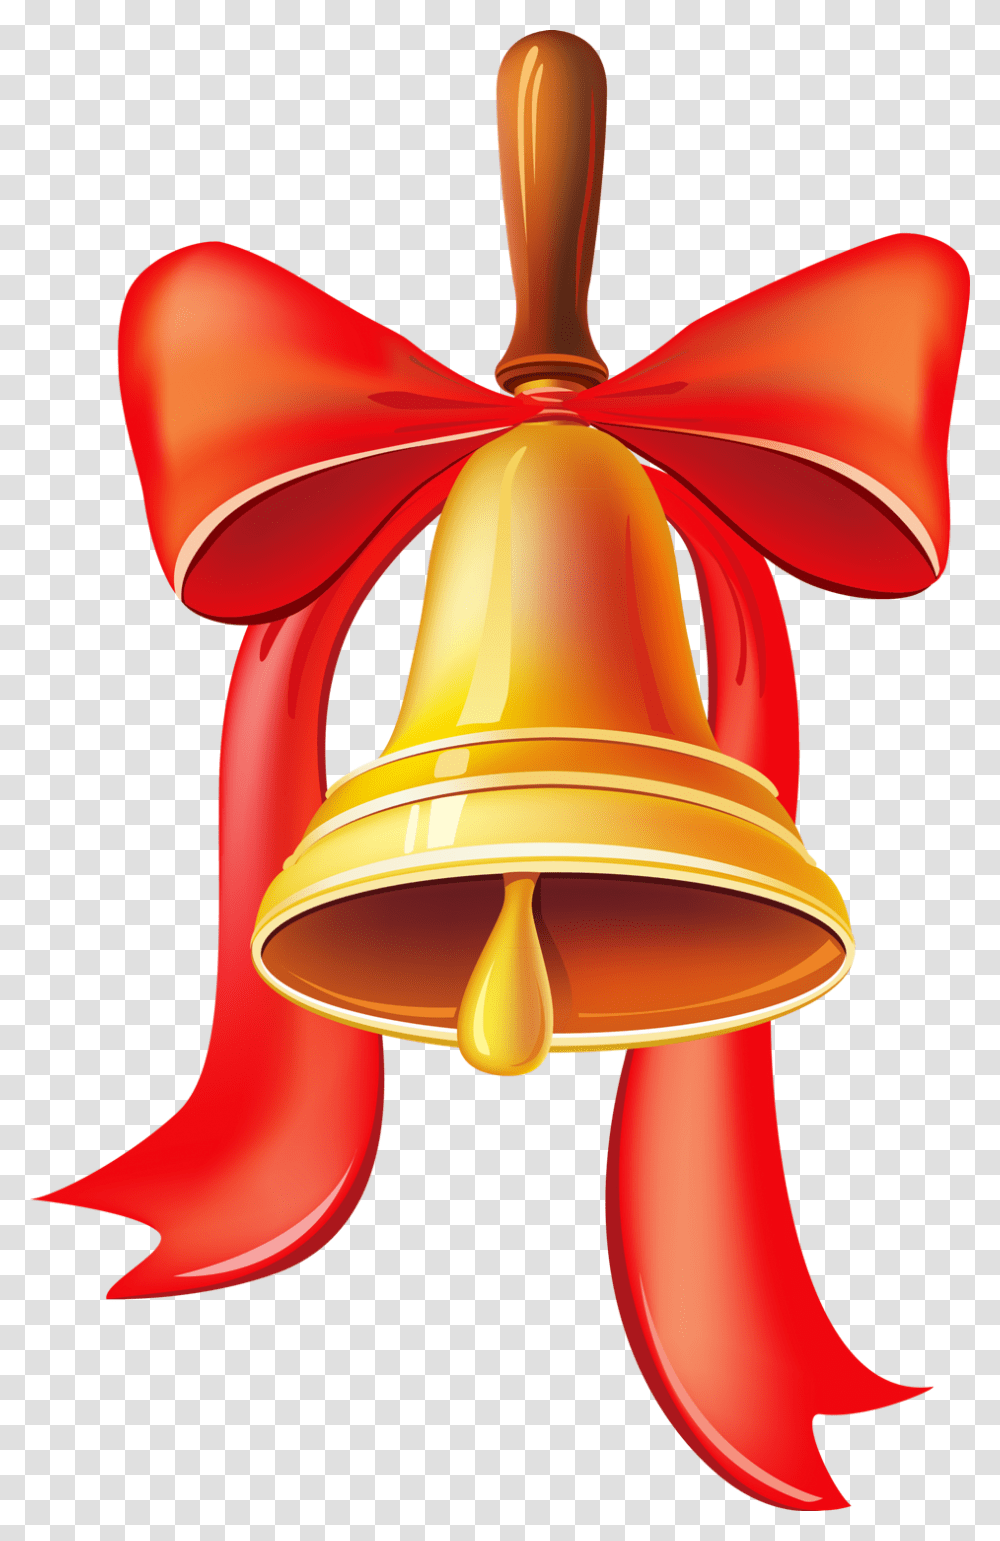 Christmas Bell With Big Ribbons Image Purepng Free School Bell, Lamp, Musical Instrument, Brass Section, Horn Transparent Png